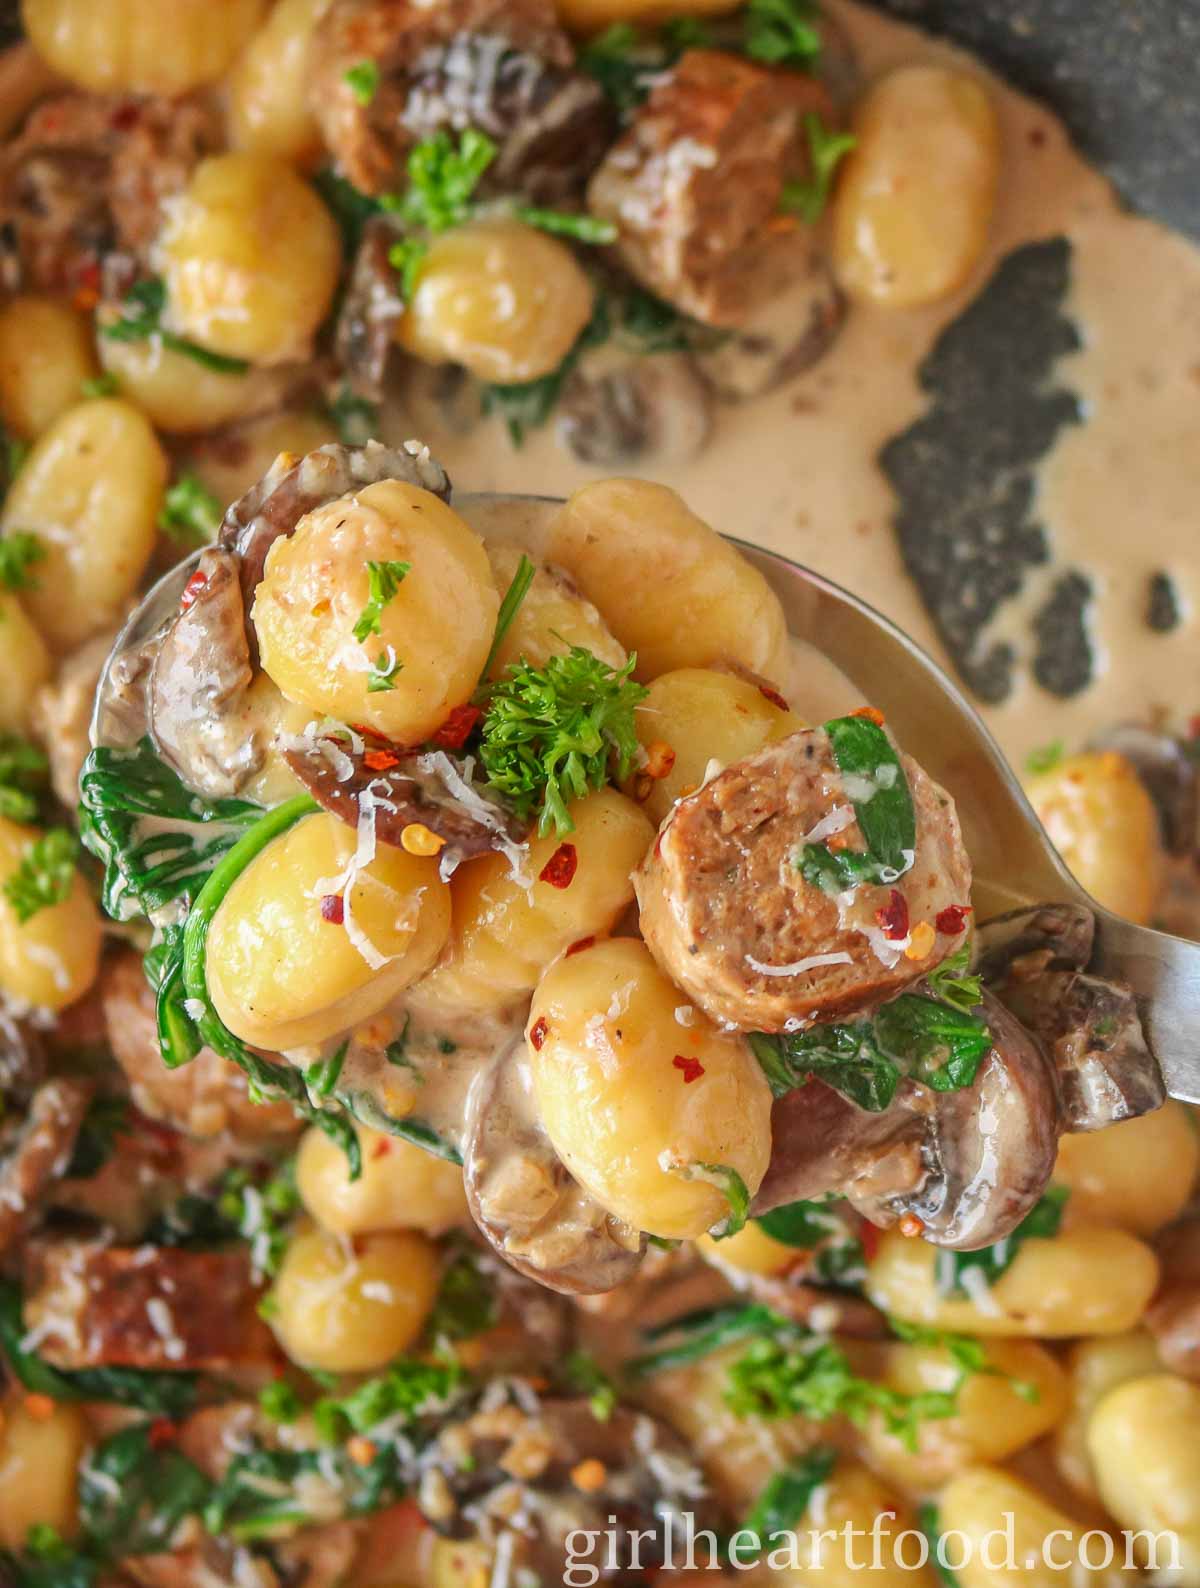 Serving spoon of sausage, gnocchi, mushrooms and spinach from a pan.